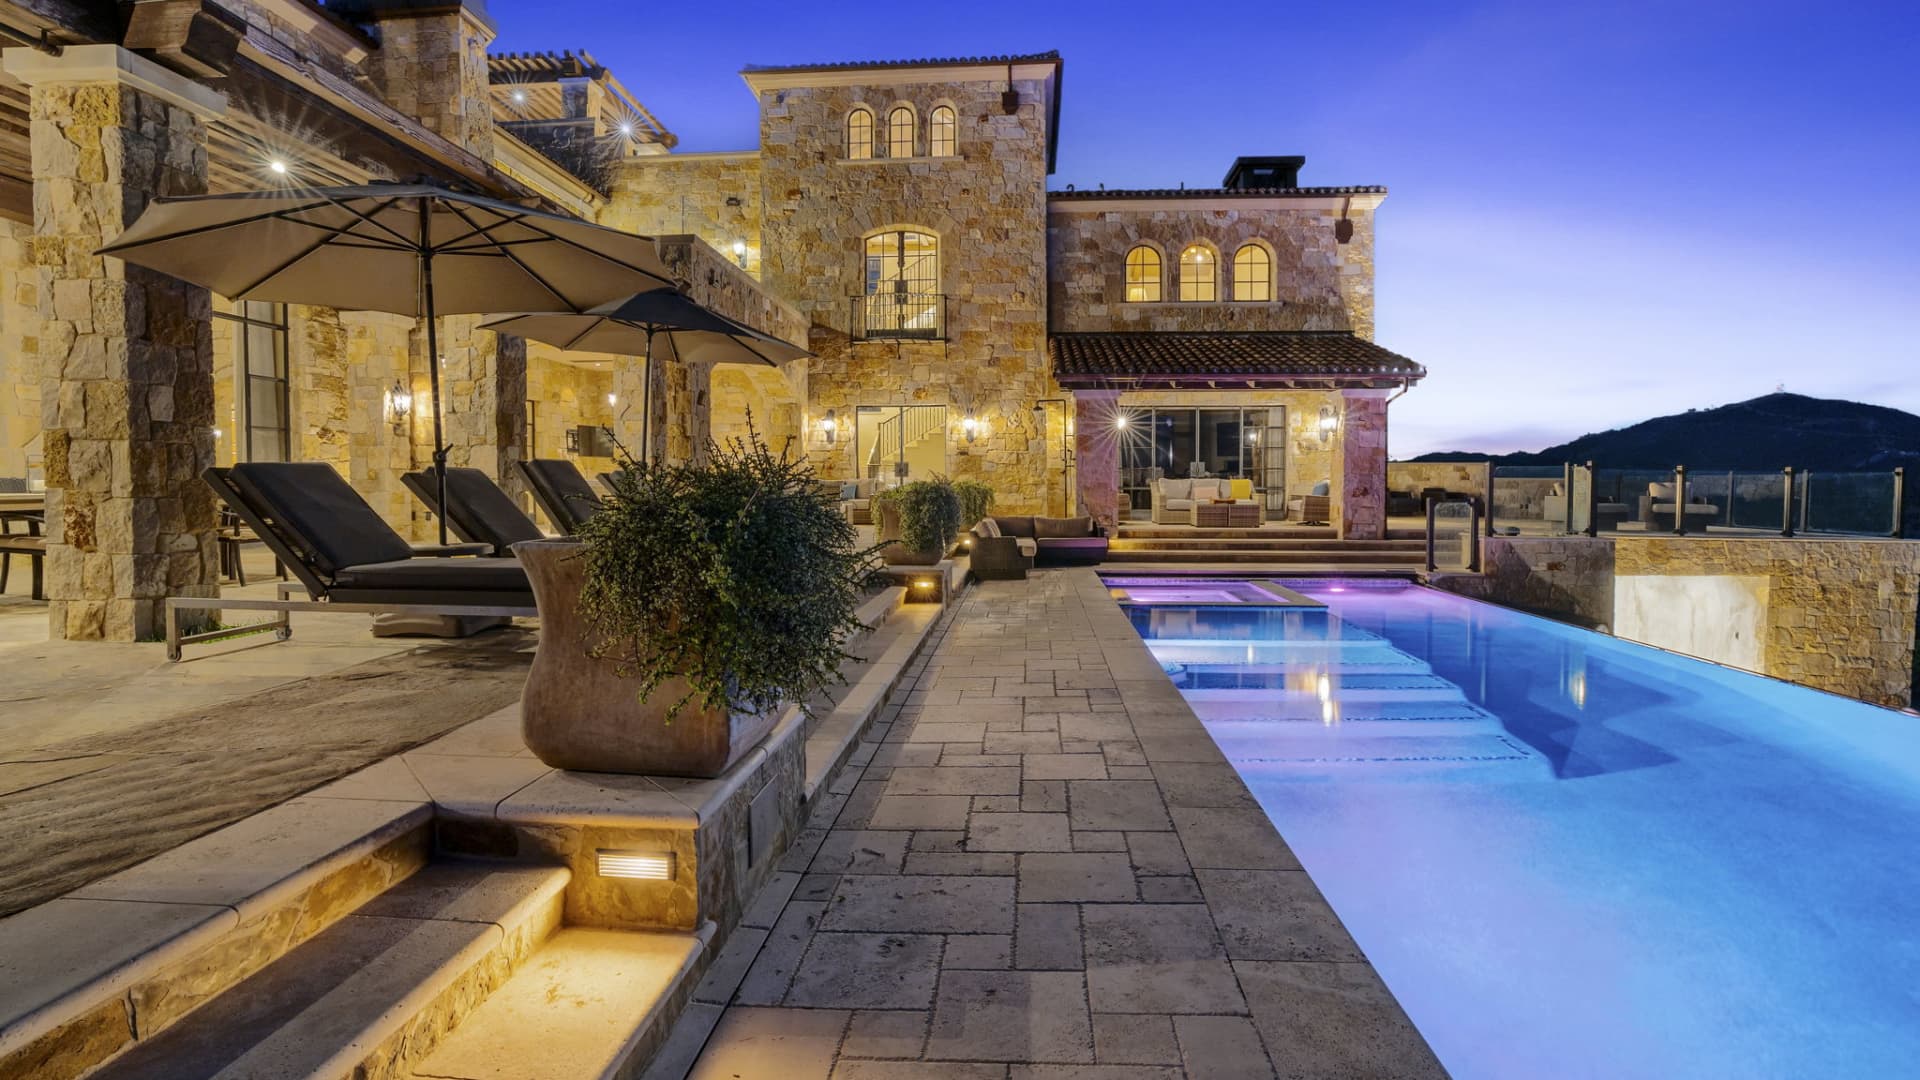 The home's tiered stone deck and infinity pool at sunset.